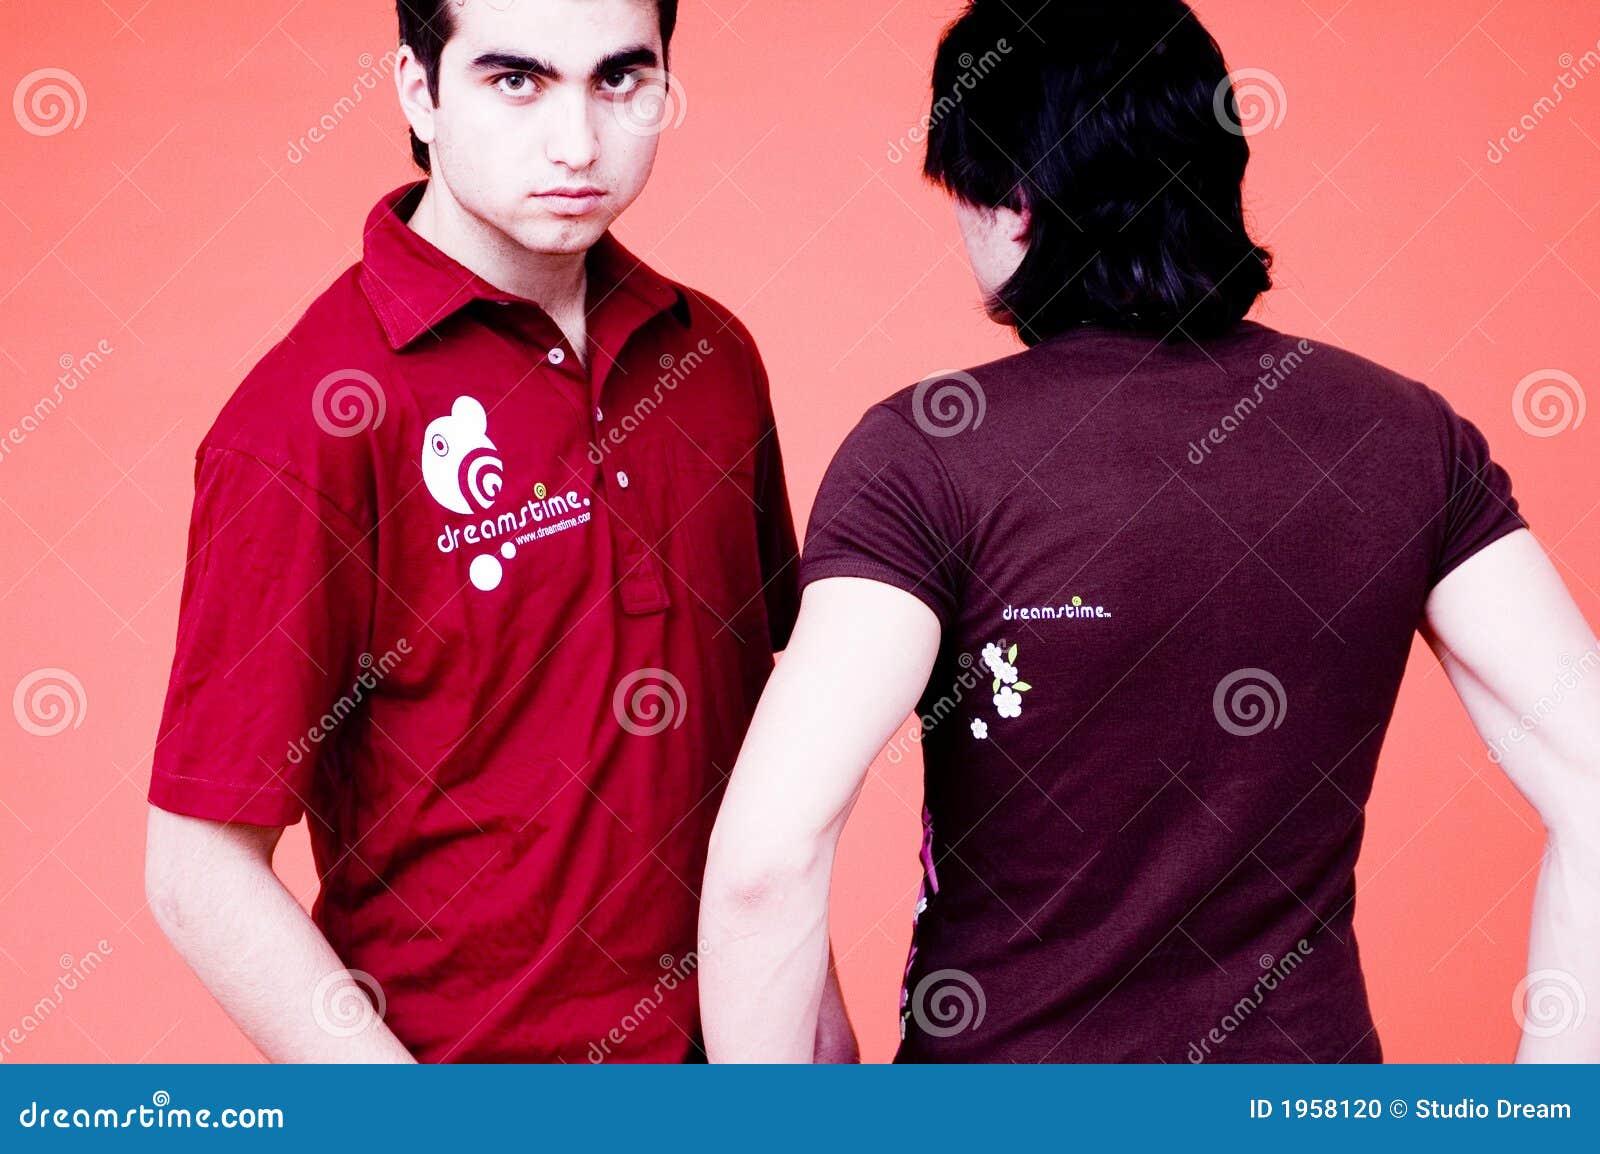 two guys-dreamstime shirts